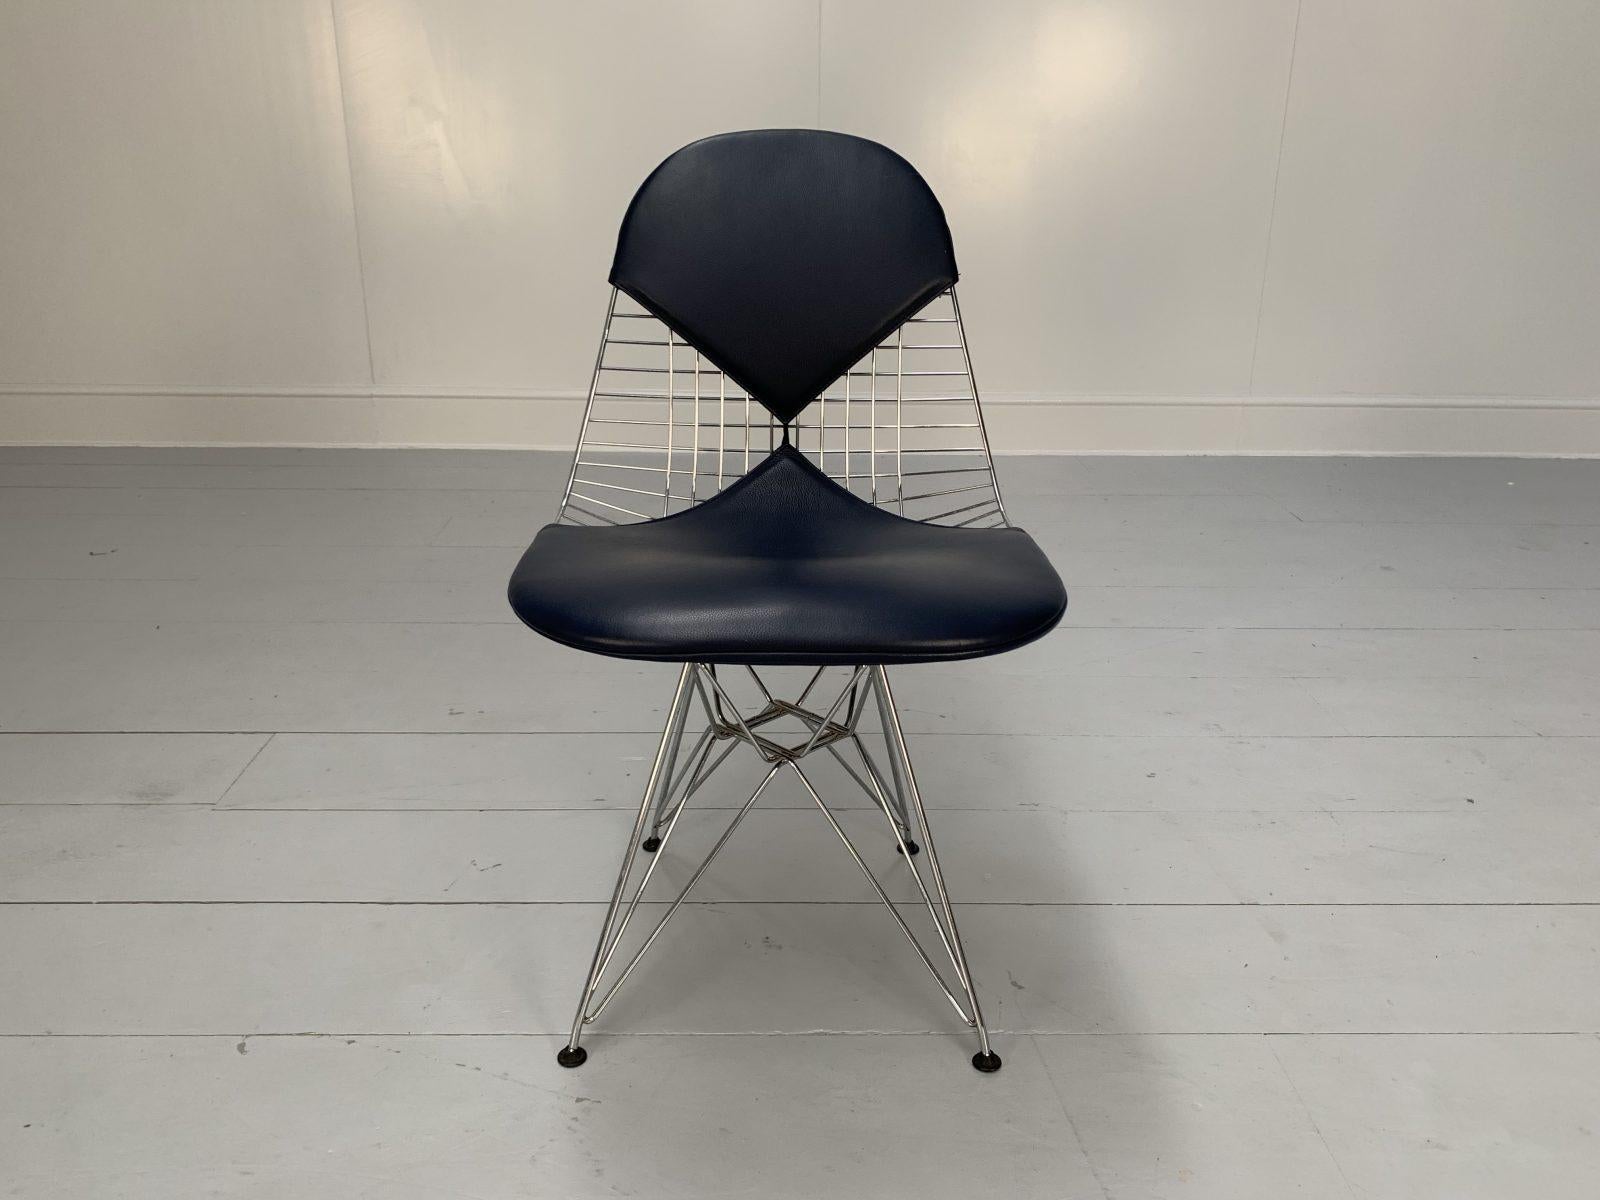 Suite of 6 Vitra “Eames DKR-2 Bikini” Chairs in Navy Blue Premium Leather For Sale 2